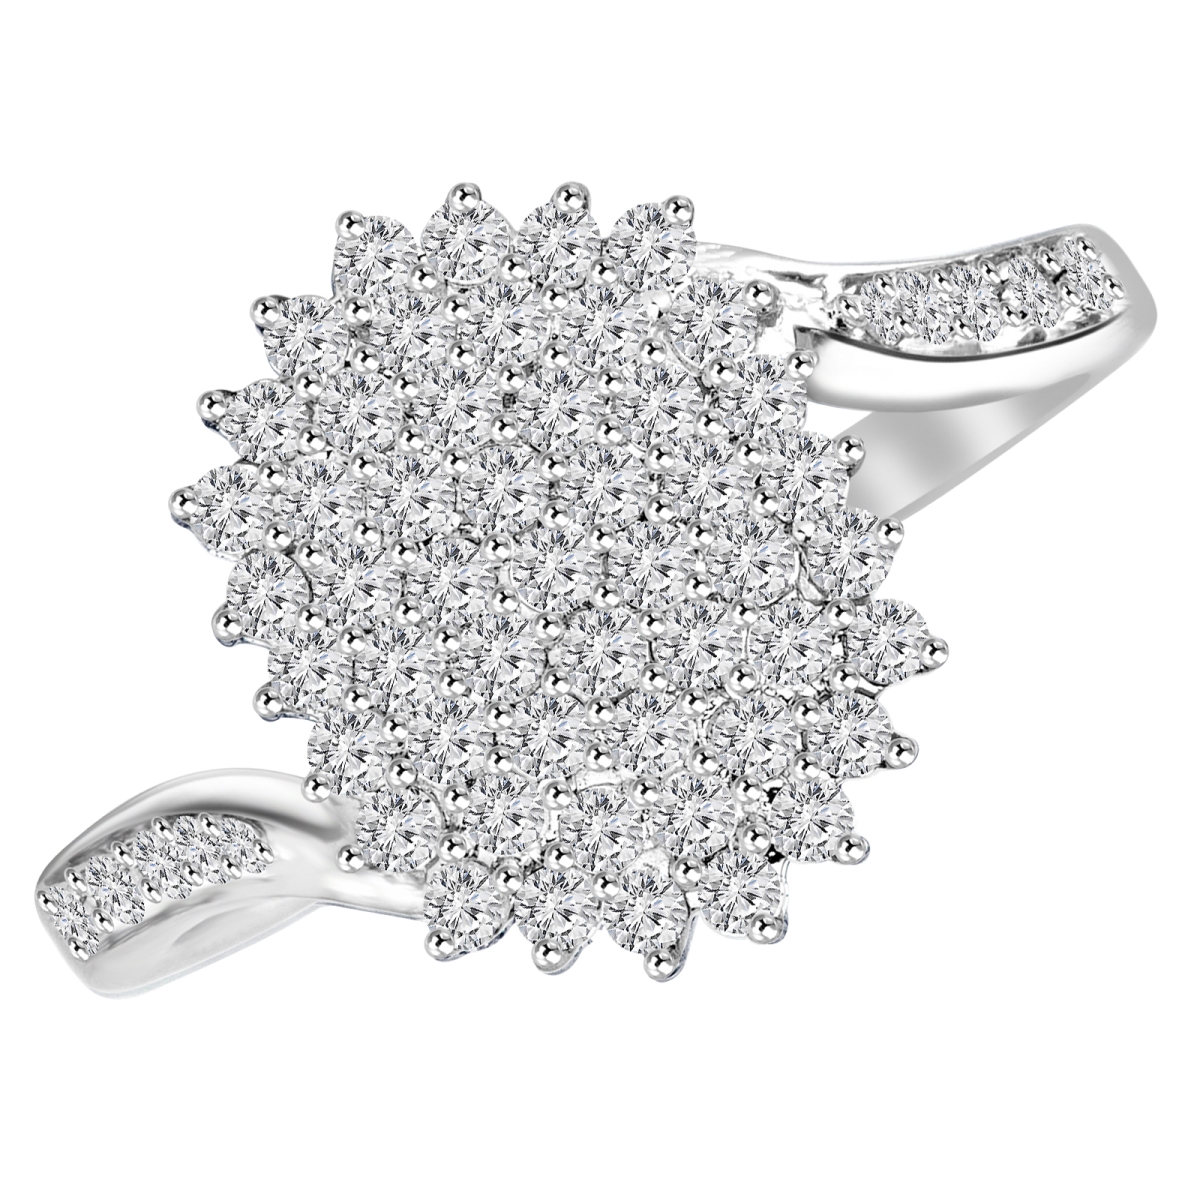 Picture of Majesty Diamonds MDR160007 0.5 CTW Round Diamond Cluster Cocktail Ring in 14K